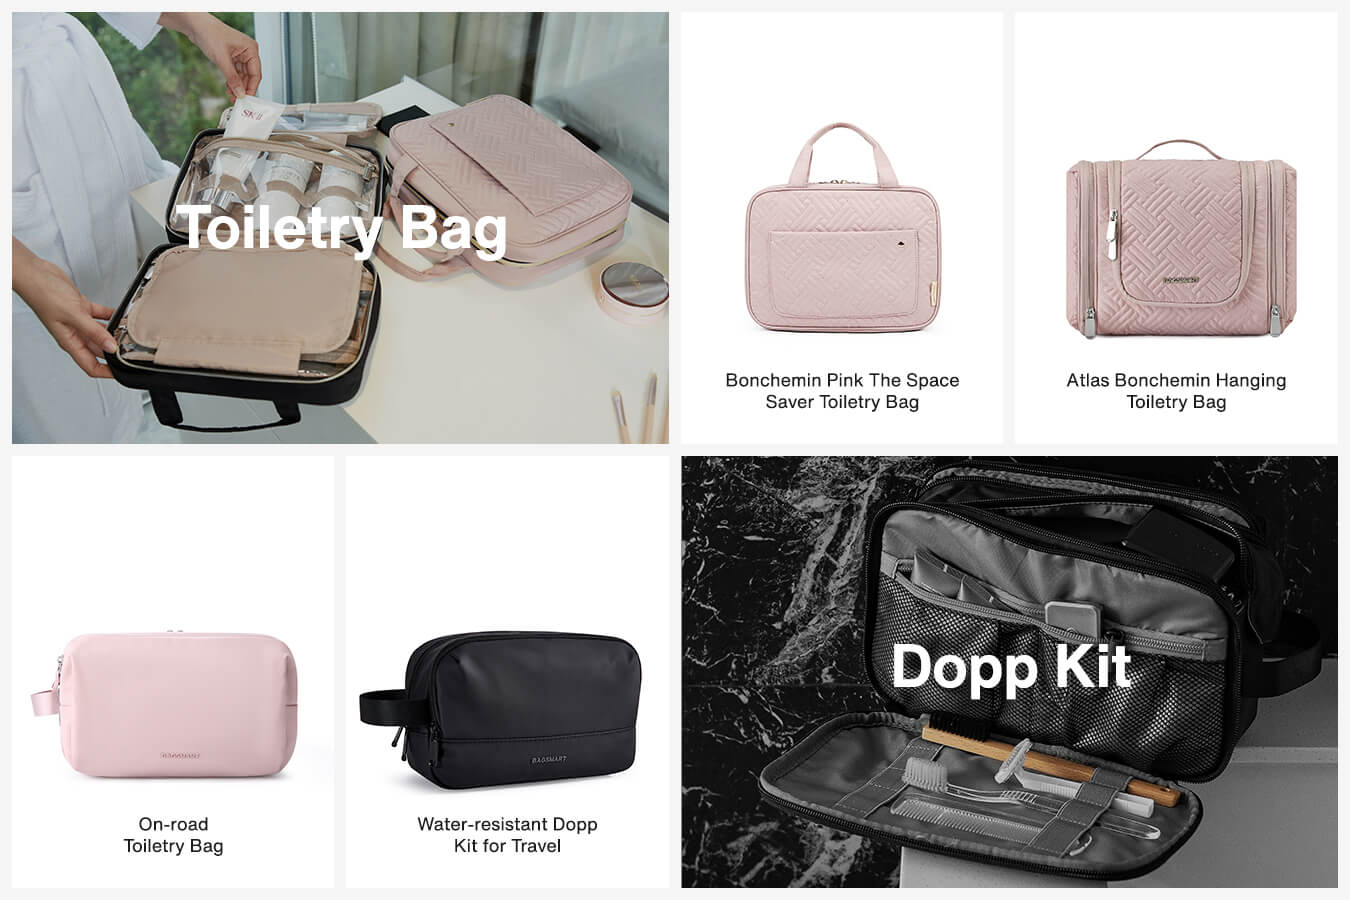 Toiletry bag and Dopp kit's storage and organization